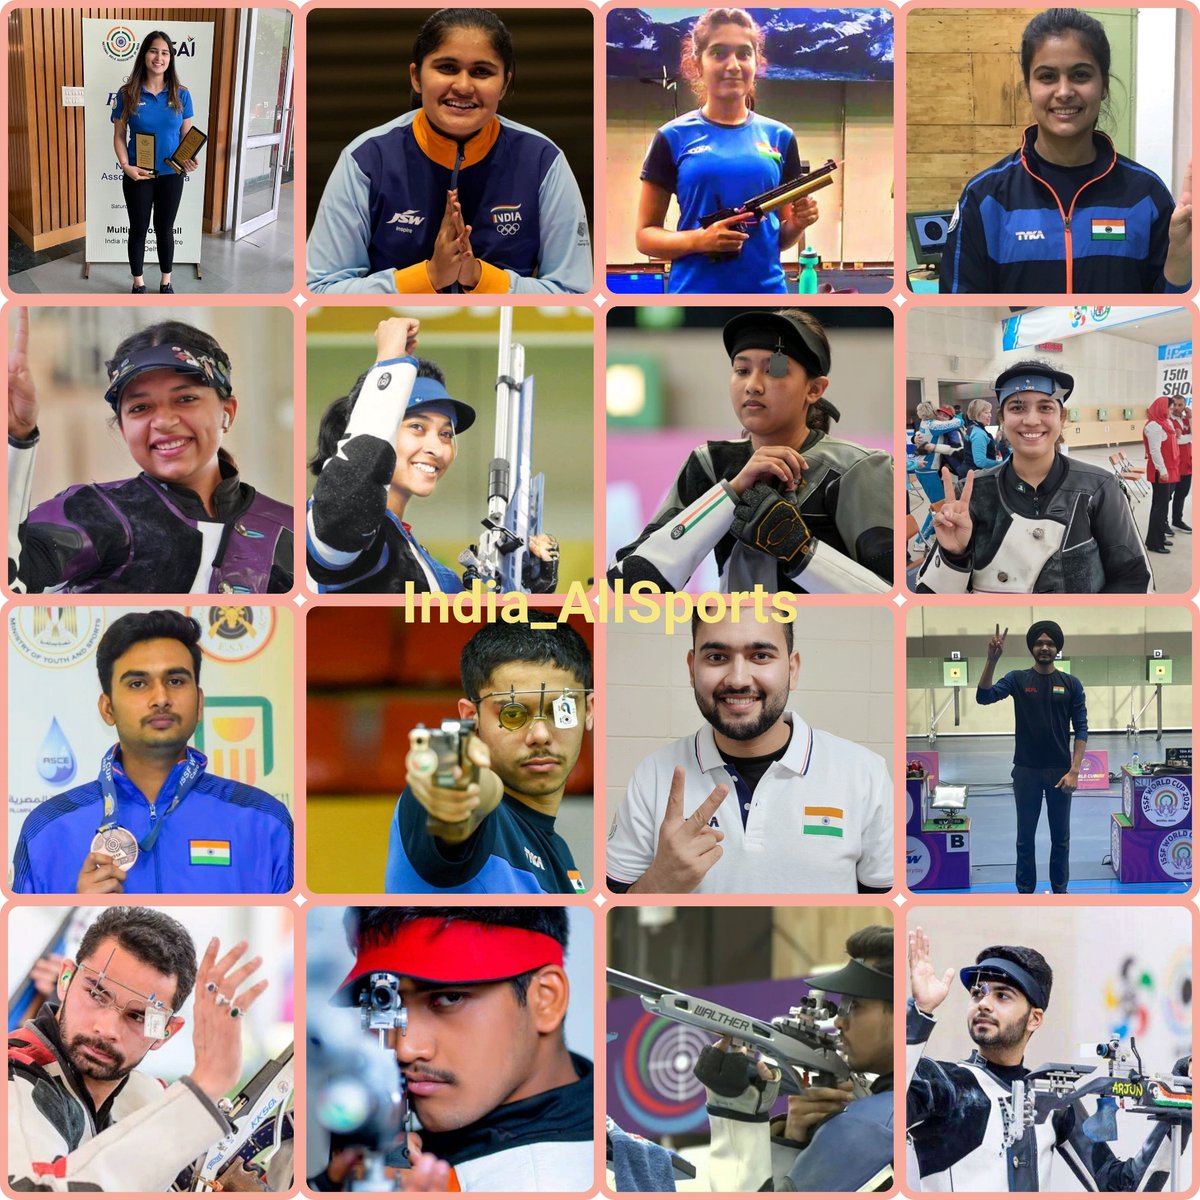 Shooting: All available 16 Olympic Quota places in Pistol & Rifle events (8 each) secured by Indian shooters ✅ ✨ Women 10m Air Pistol: Esha & Palak ✨ Women's 25 m Pistol: Manu & Rhythm ✨ Women's 10m Air Rifle: Mehuli & Tilottama ✨ Women's 50m Rifle 3P: Sift & Shriyanka…